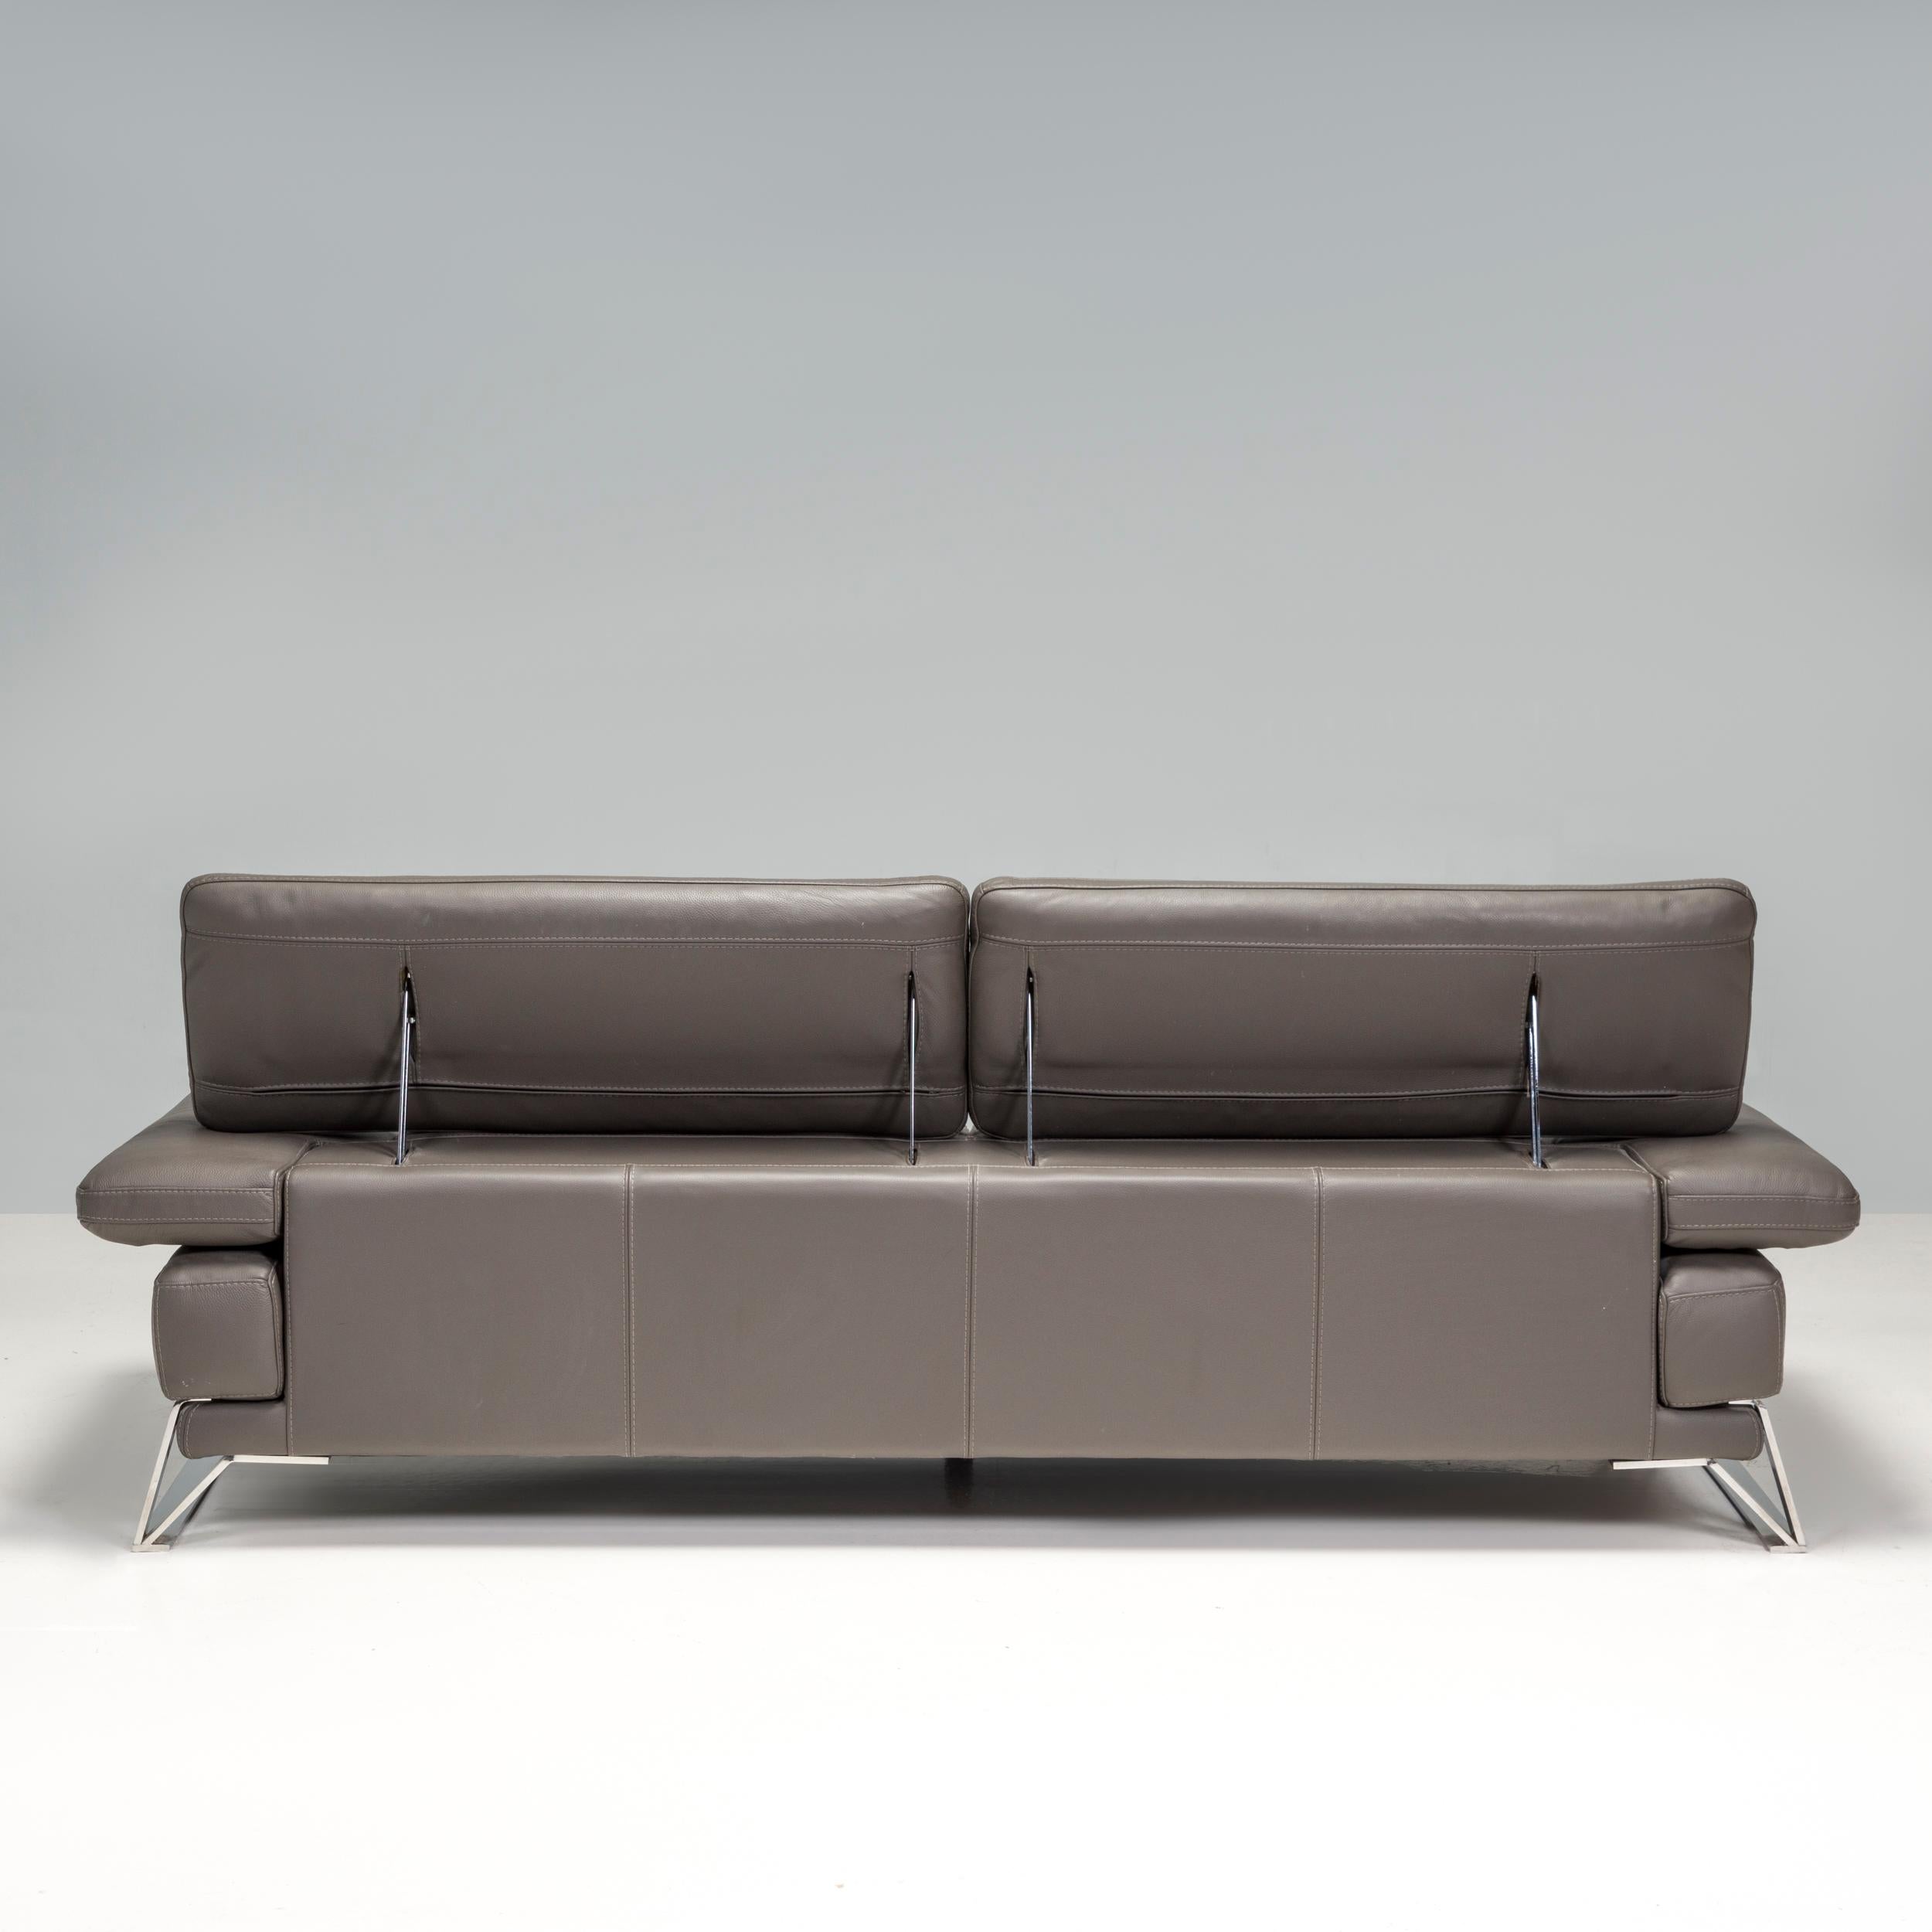 Contemporary Roche Bobois Three Seater Grey Leather Sofa, With Adjustable Backs